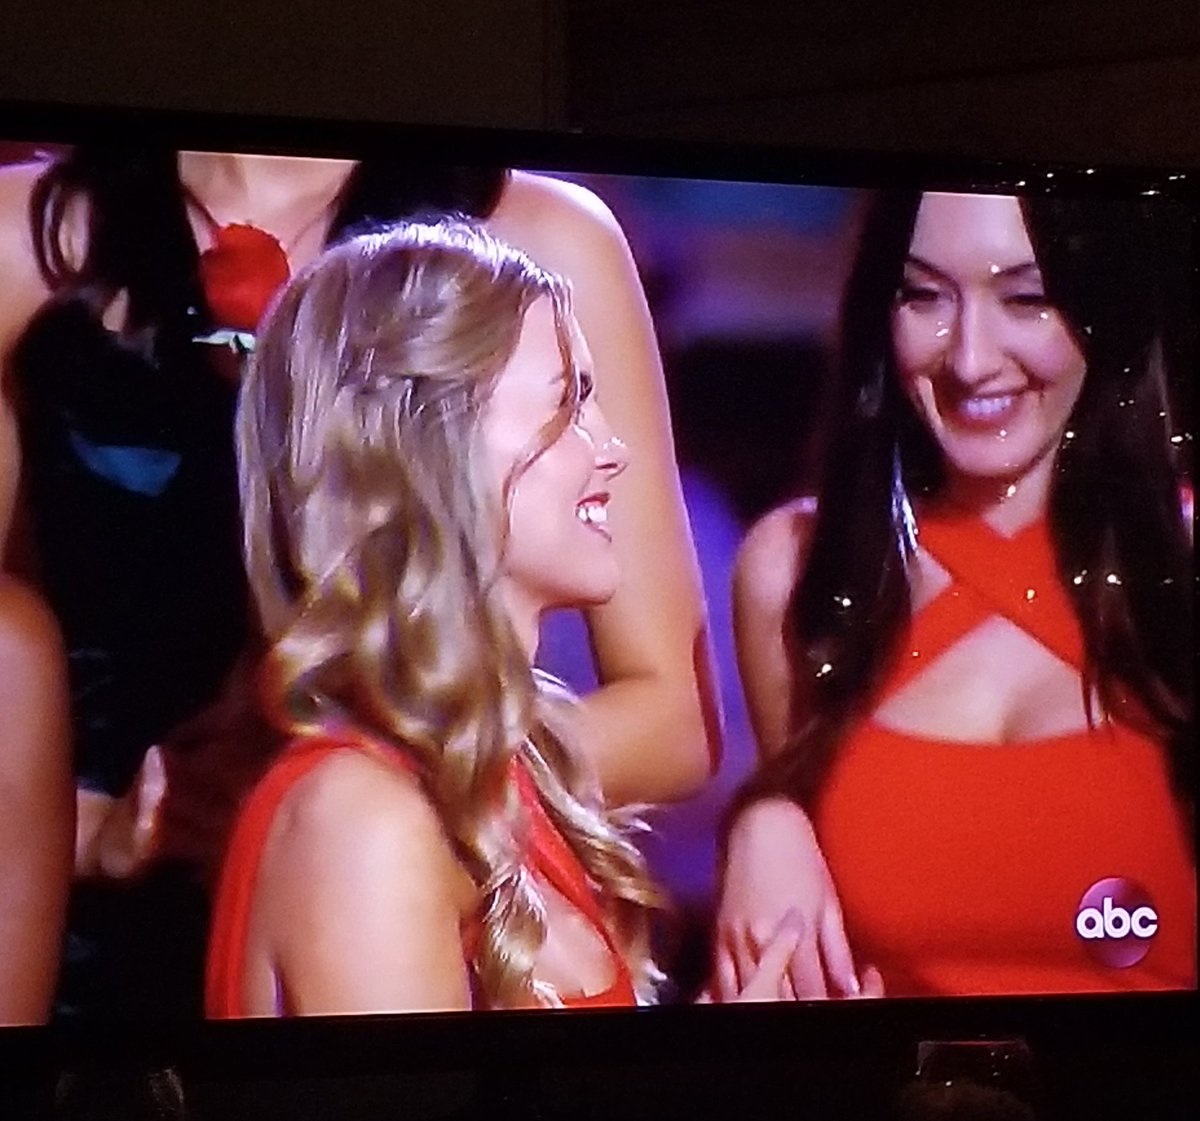 HOW DID I NOT SEE THIS UNTIL THE ROSE CEREMONY #SameDress #TheBachelor